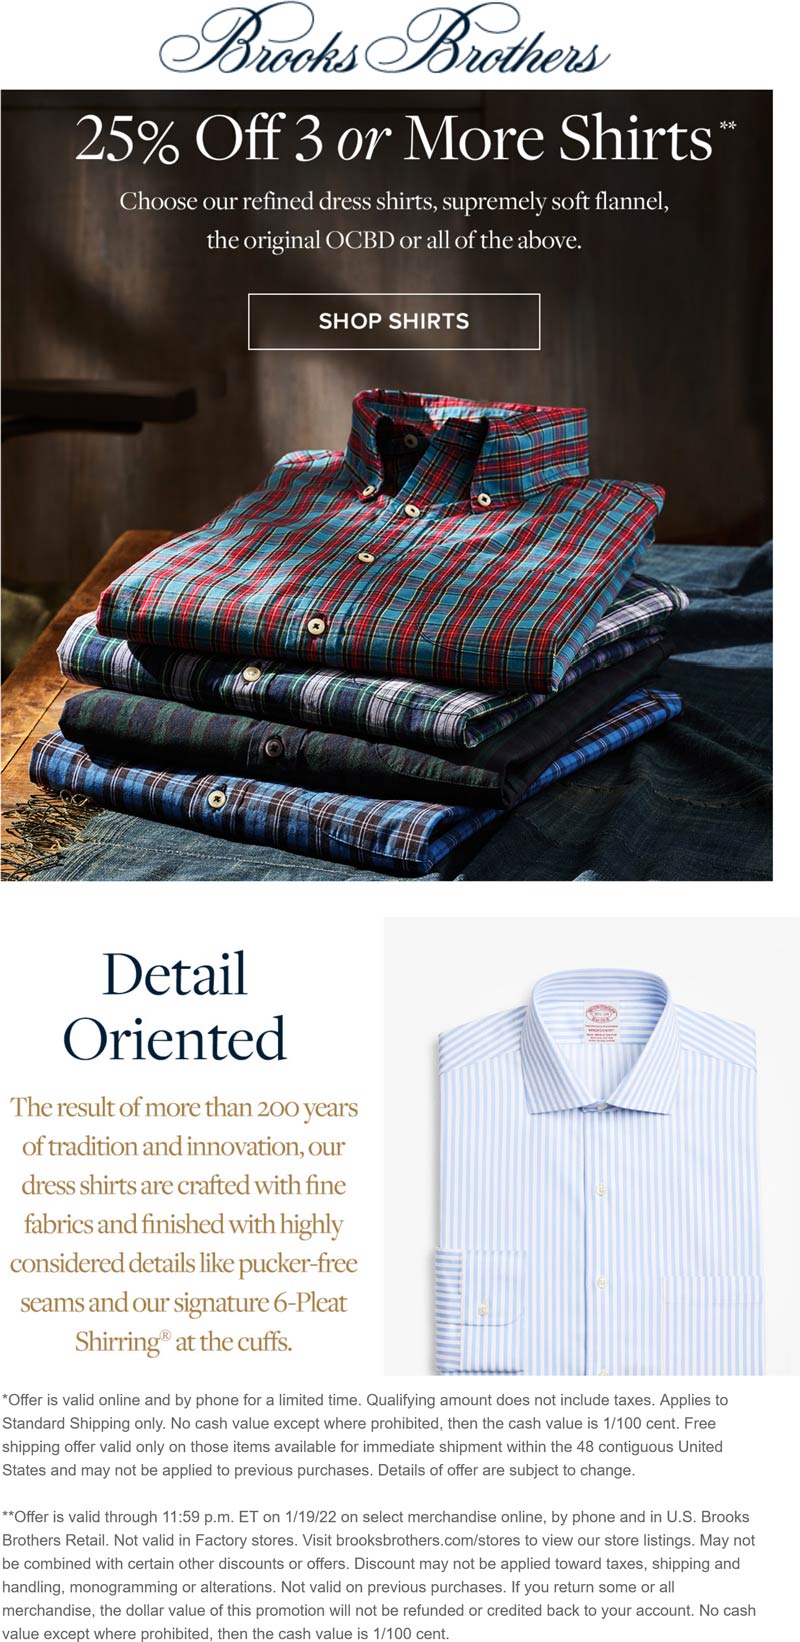 Brooks Brothers stores Coupon  25% off 3+ shirts at Brooks Brothers, ditto online #brooksbrothers 